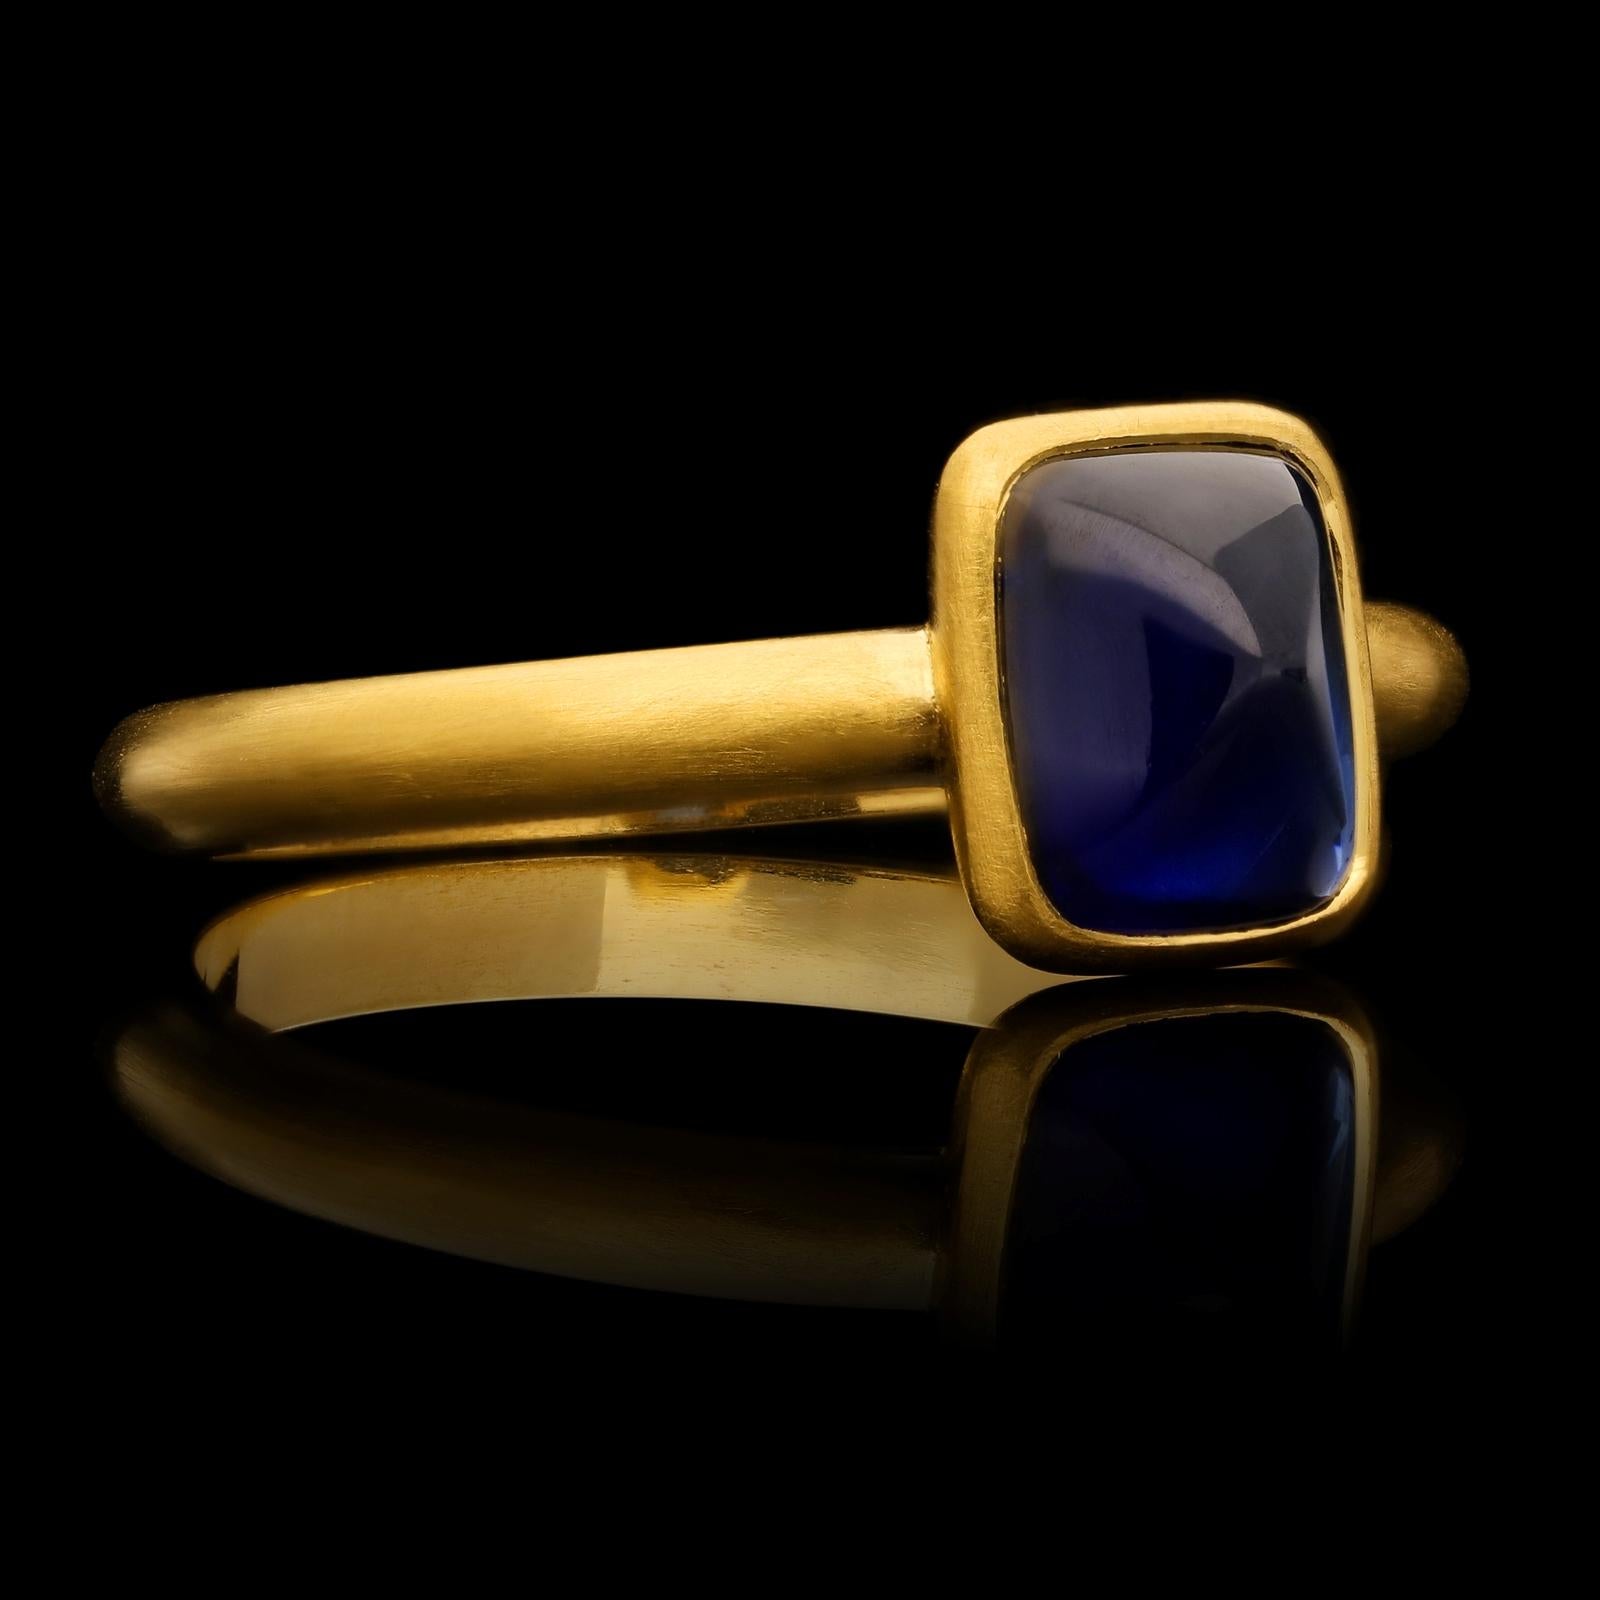 A contemporary Burmese sapphire and gold ring by Hancocks, set with a cushion shaped sugar loaf unheated Burma sapphire of rich blue colour weighing 2.06ct, rubover set in a finely crafted handmade 22ct yellow gold mount with beautiful satin finish